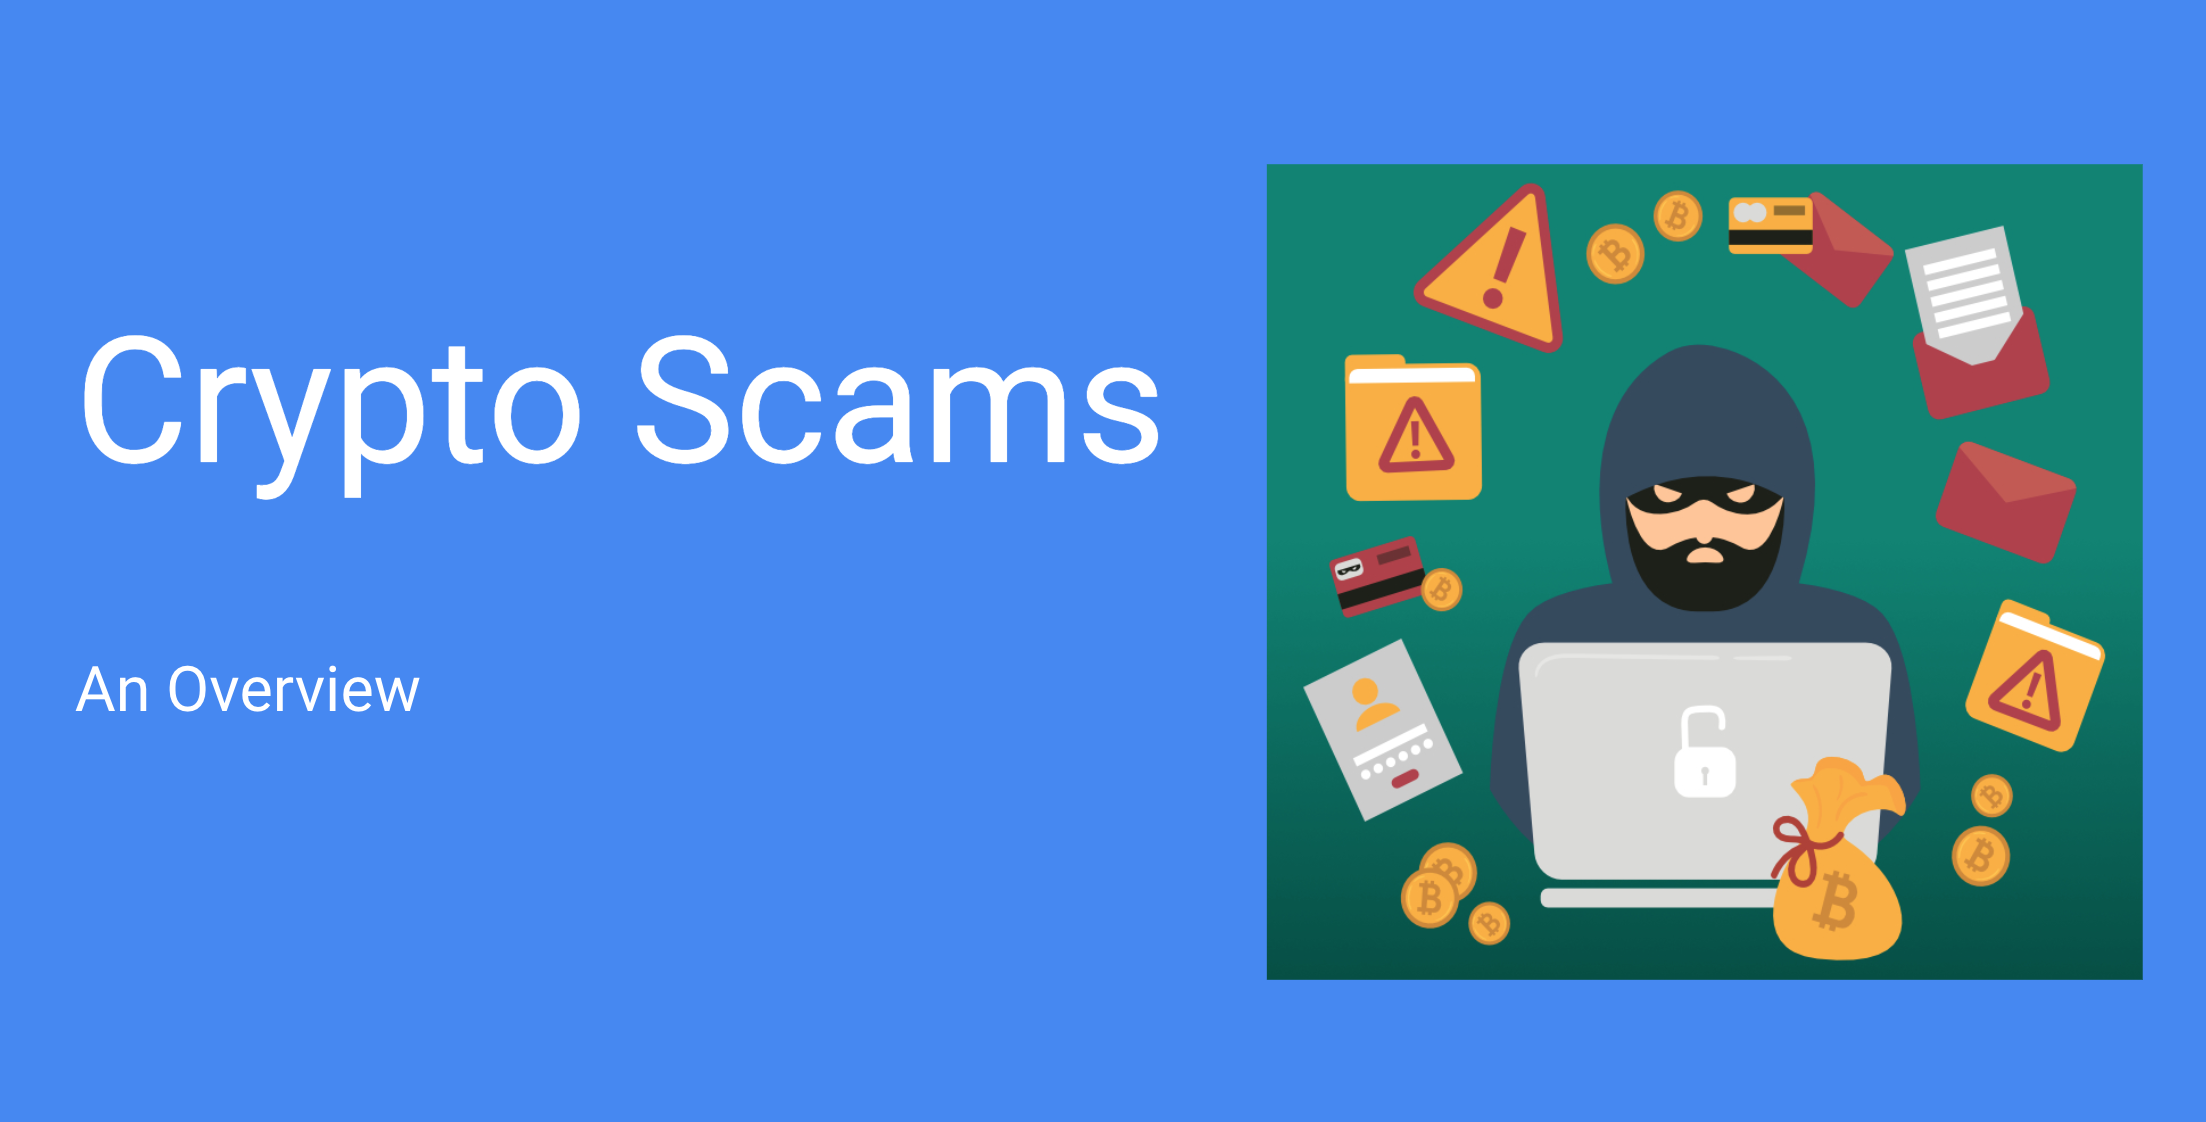 One of the biggest problems in the crypto and blockchain industry preventing mass investment today are rampant scams. Crypto Scams: an Overview Part 1